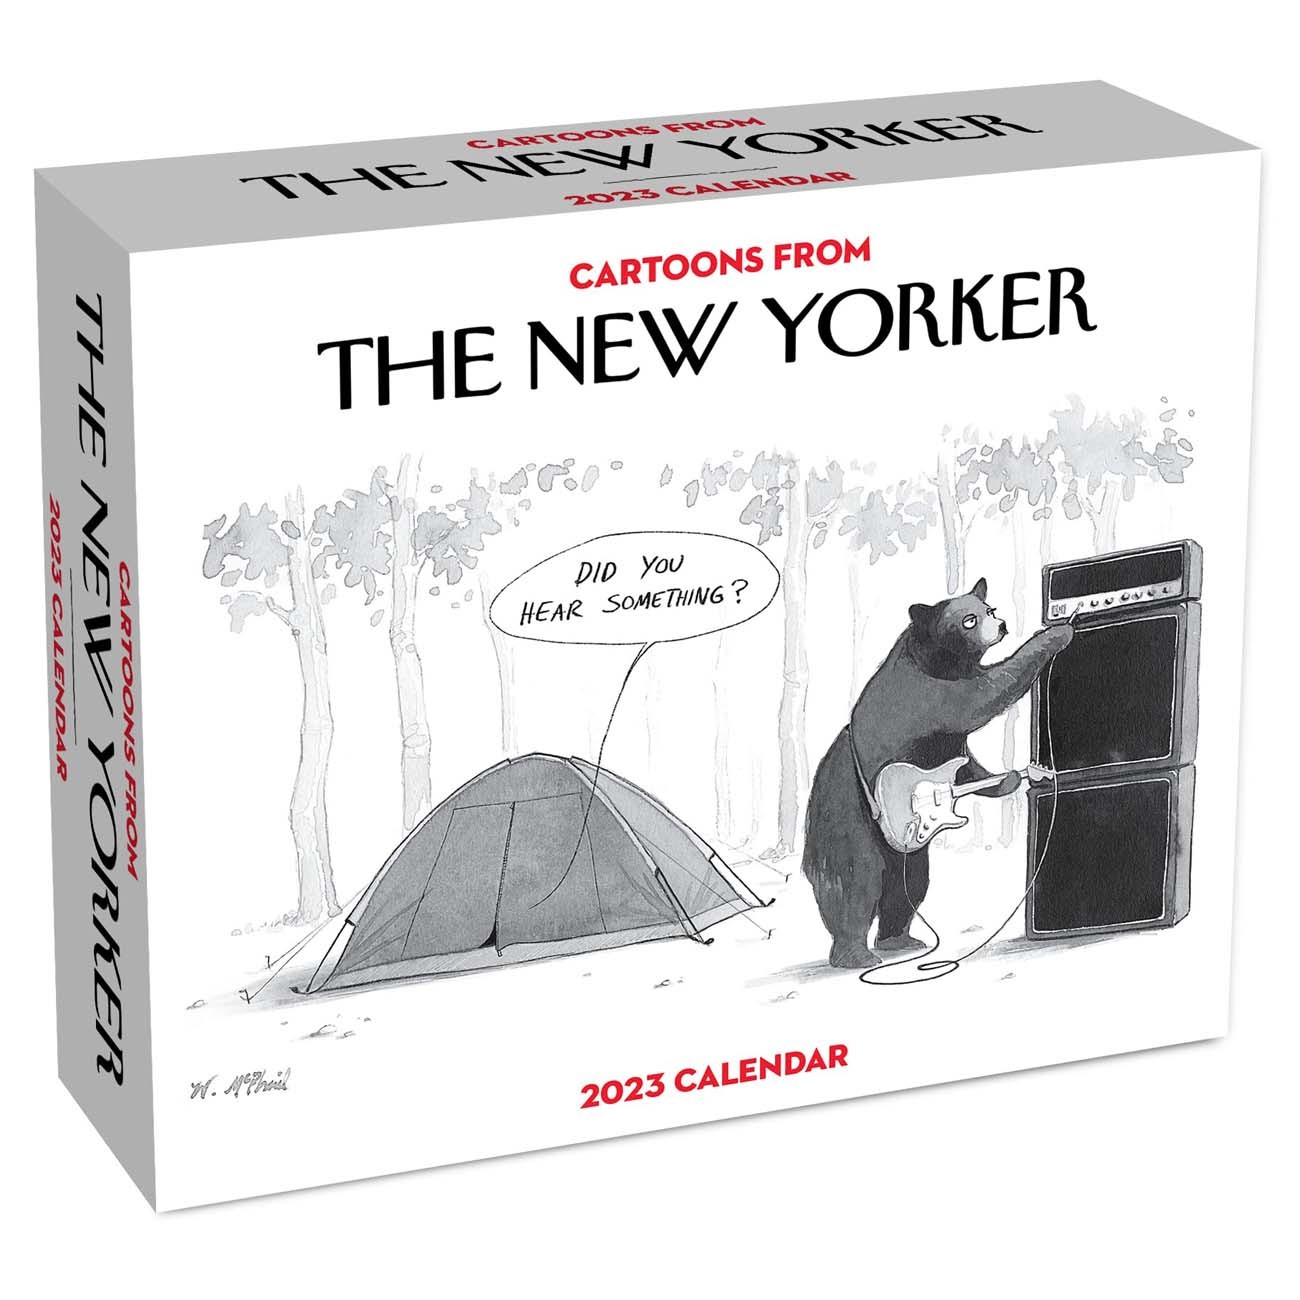 cartoons-from-the-new-yorker-2023-day-to-day-calendar-books-stationery-met-opera-shop